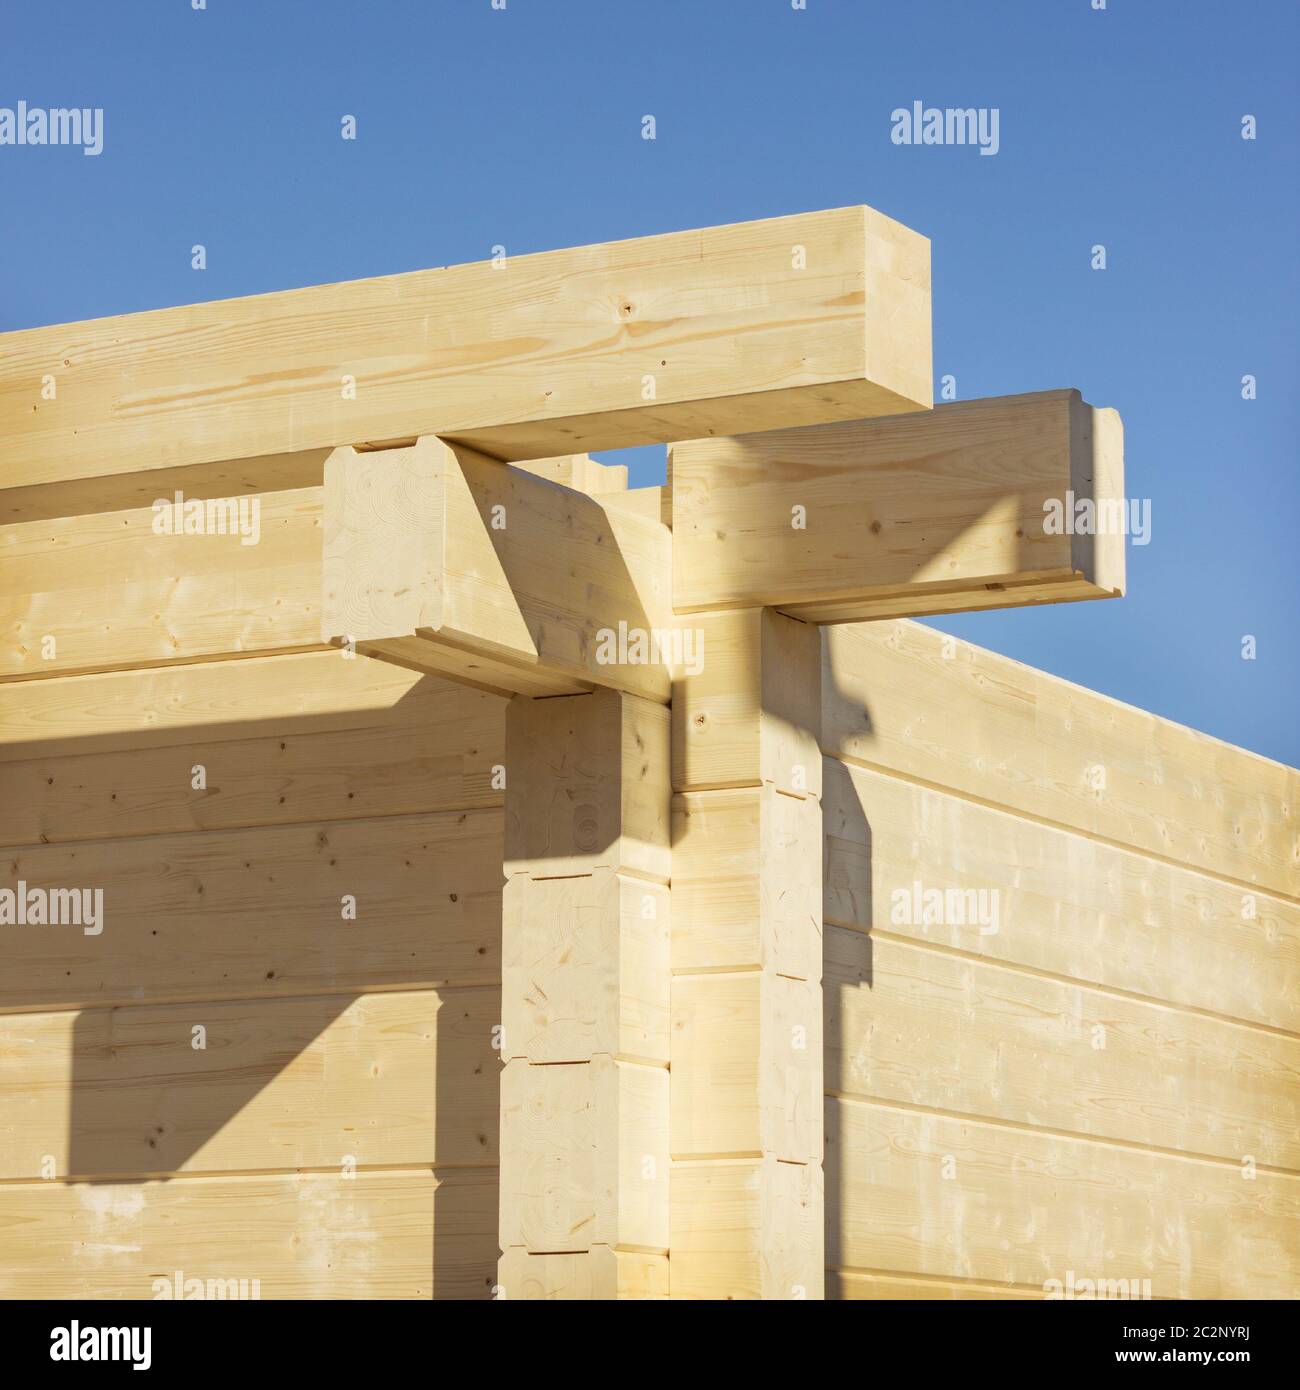 Construction. Buildings from glued beams Stock Photo